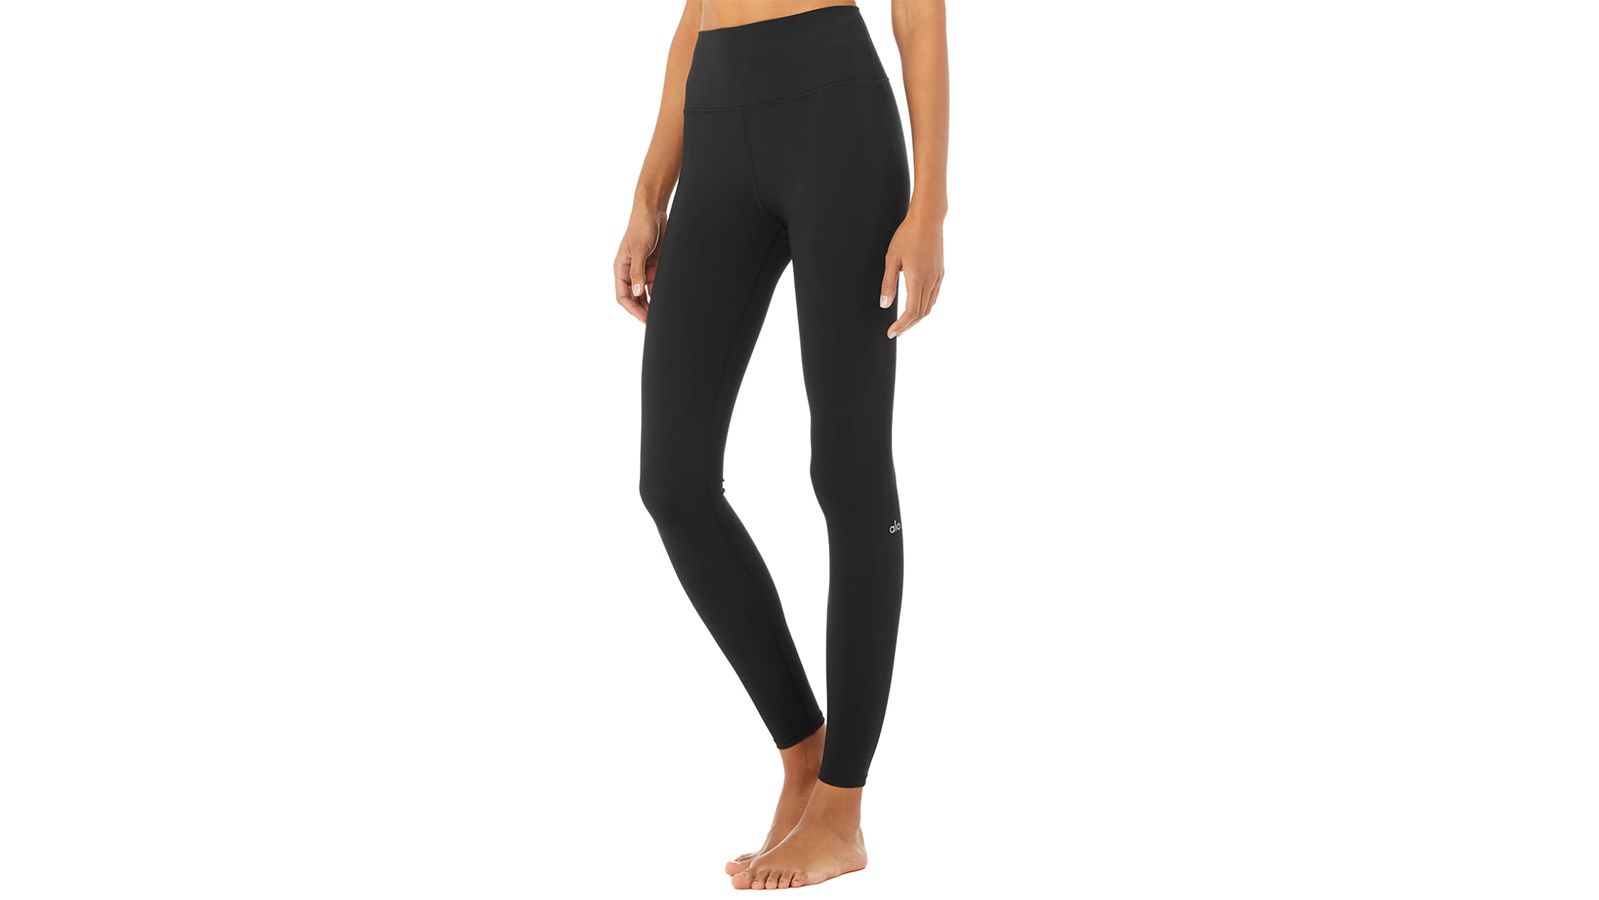 Alo Yoga Airbrush BLACK GLOSSY Leggings XS Better for a night out than the  gym